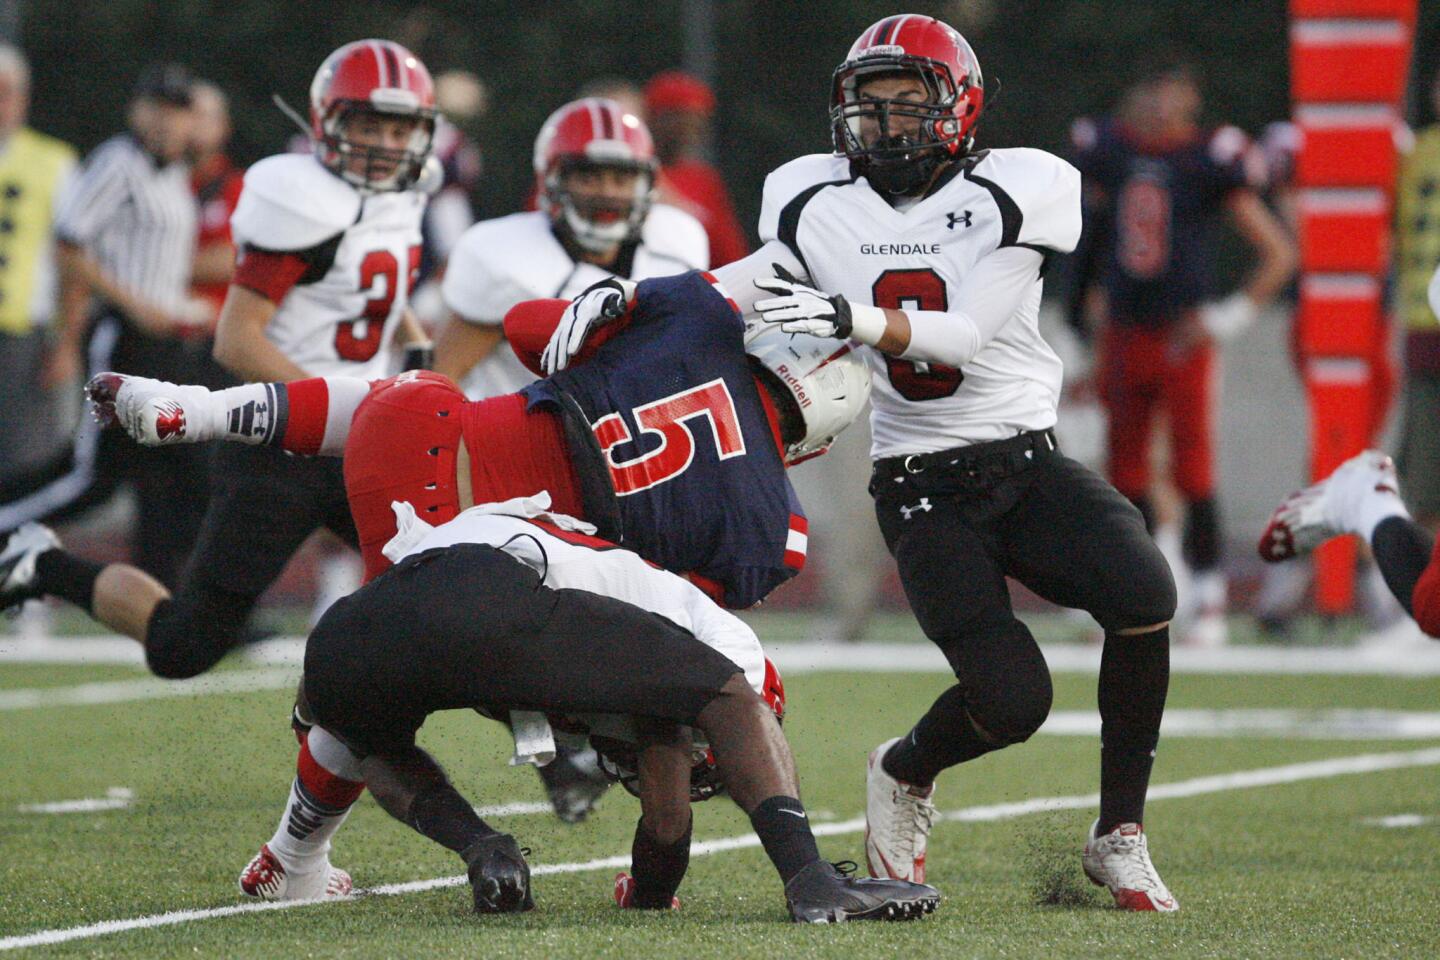 Glendale's Martin Marin, right, tackles La Salle's Kyle Lewis during a game at La Salle High School in Pasadena on Friday, on August 31, 2012.